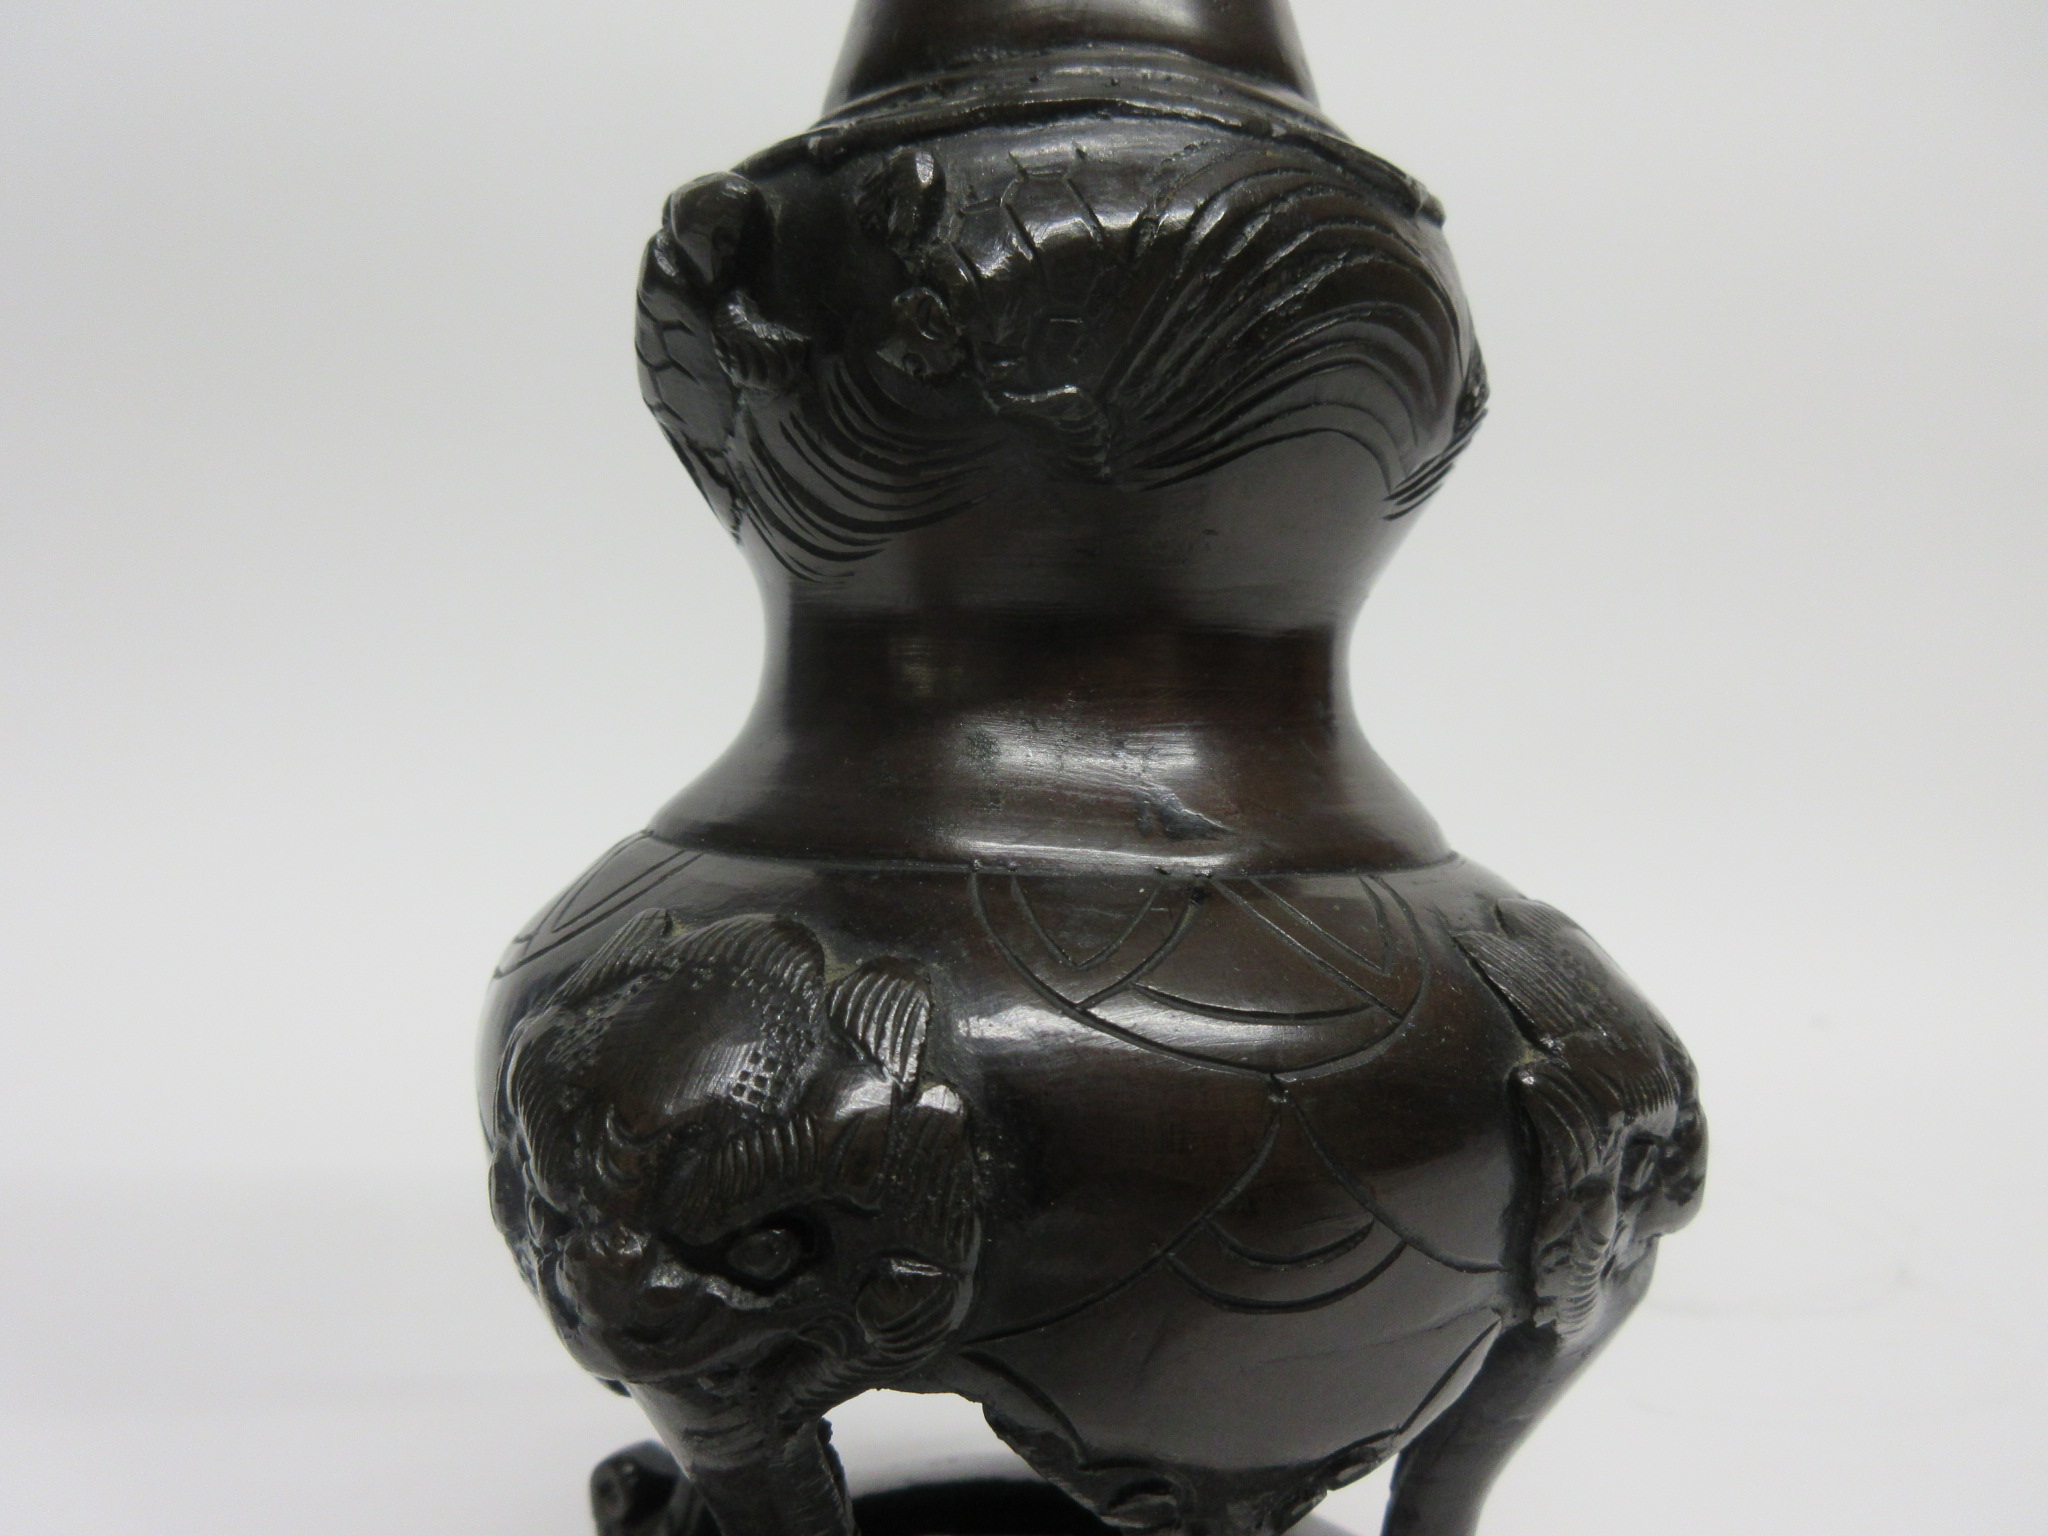 Oriental bronze candlestick with applied decoration of turtles and dragons, 31cm high - Image 8 of 8